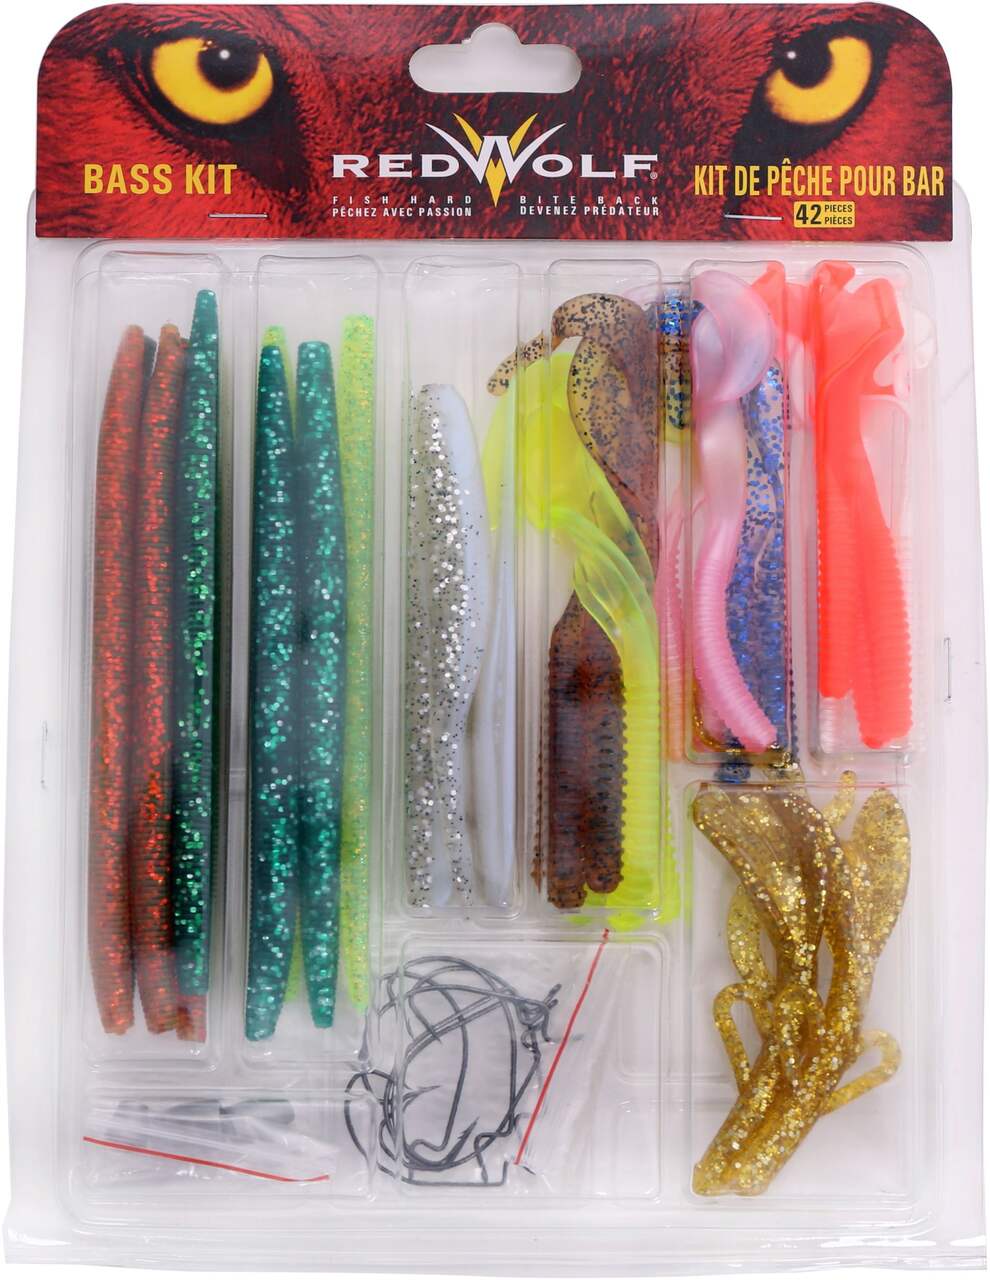 https://media-www.canadiantire.ca/product/playing/fishing/fishing-lures/0777753/red-wolf-bass-kit-42-piece-db5589ed-c06a-44a4-89ad-ed0edf0411f7-jpgrendition.jpg?imdensity=1&imwidth=640&impolicy=mZoom